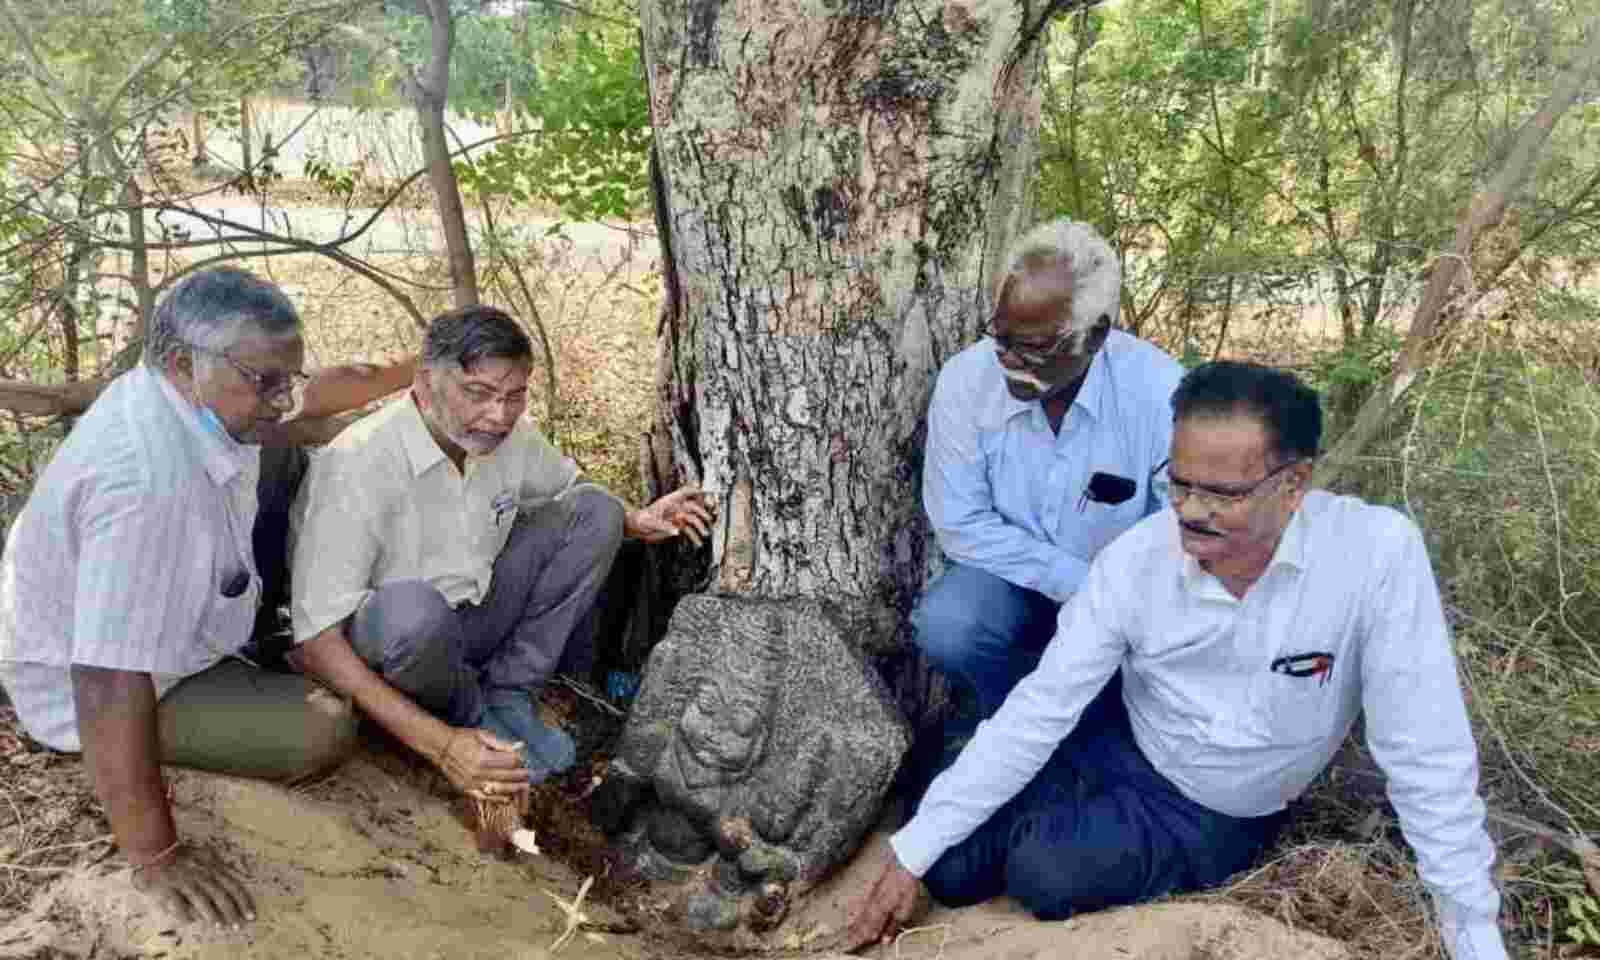 1,000-Year-Old Jaina Sculptures Discovered near Hyderabad, Telangana: Largest 'Dwarapala' Sculpture Found in Siddipet_30.1